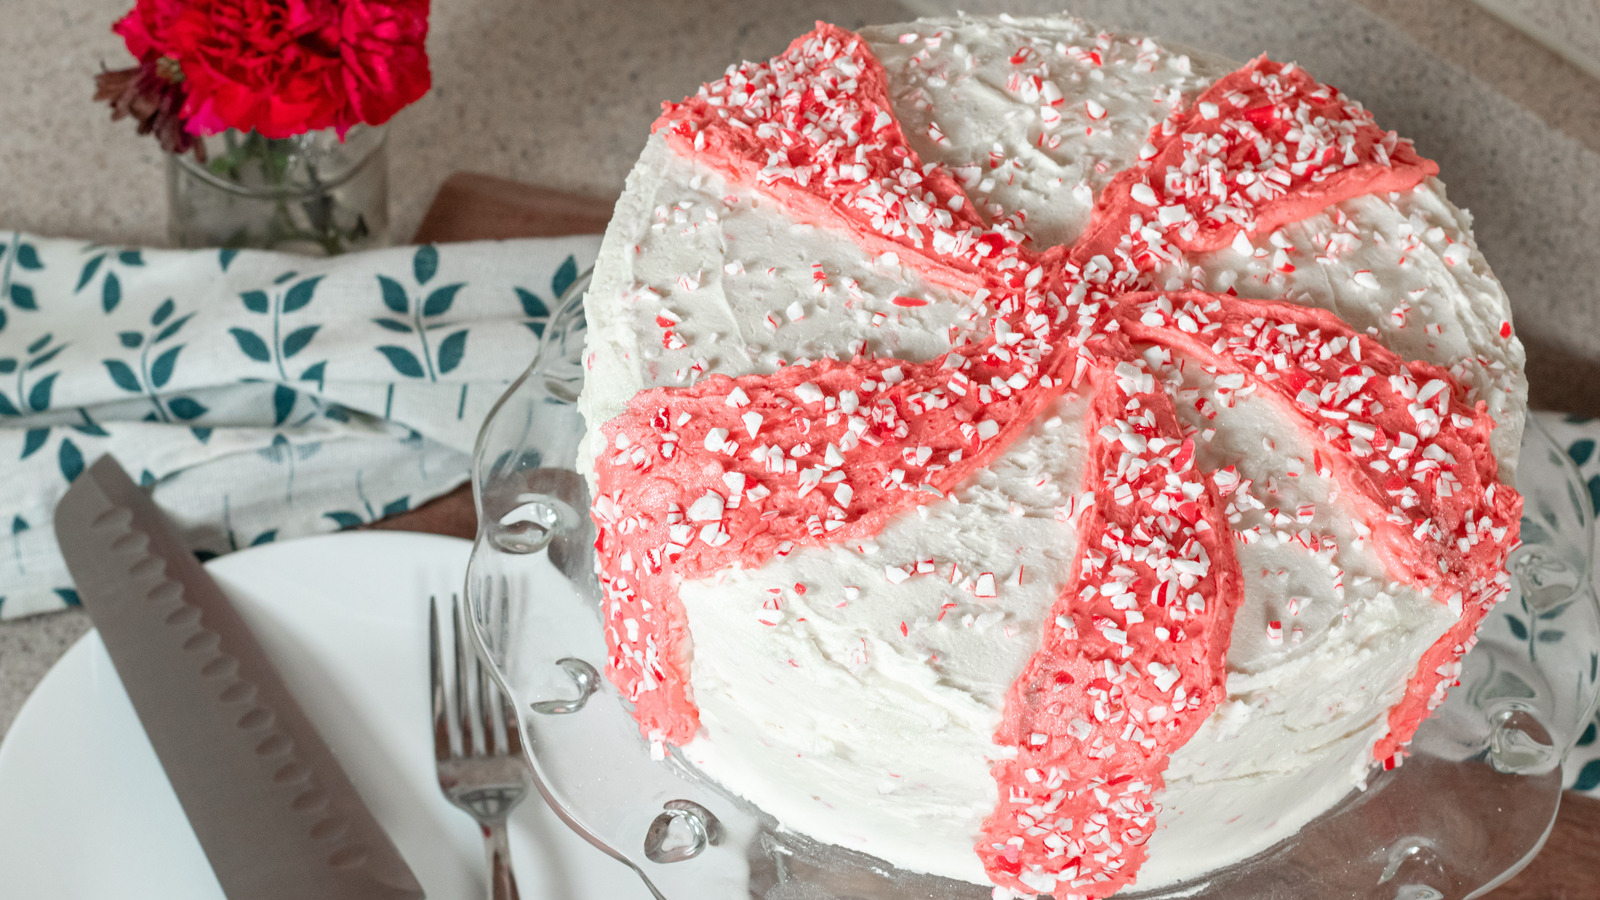 Peppermint Dream Dessert - 365 Days of Baking and More